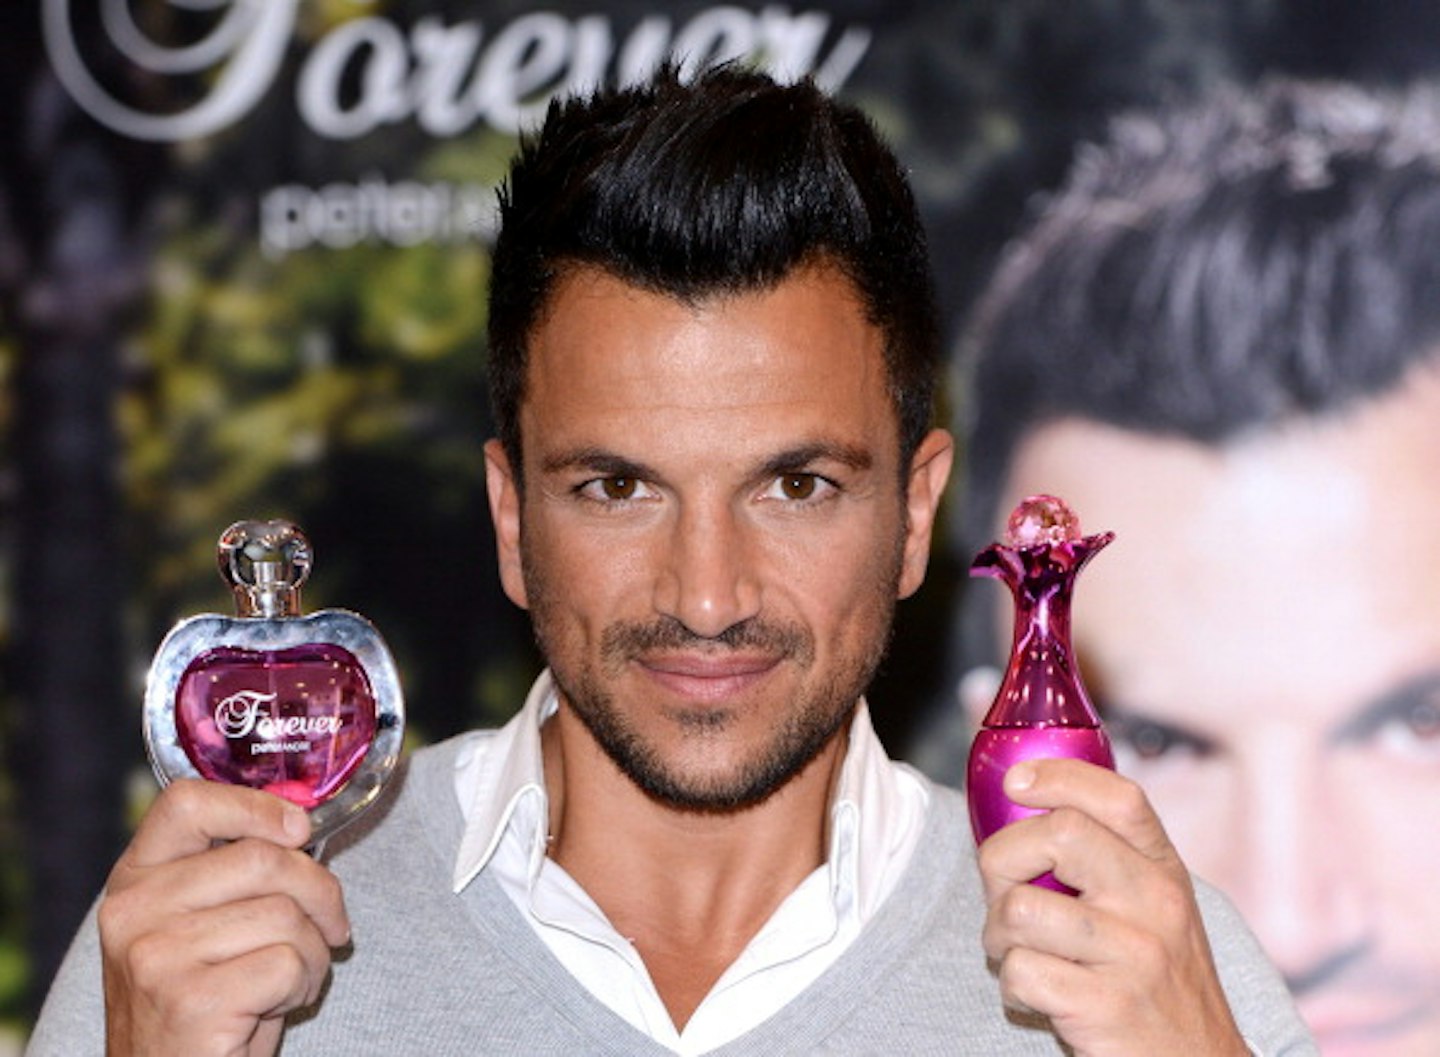 Peter Andre launches two brand new perfumes for women, 'Forever' and 'Forever Young' 